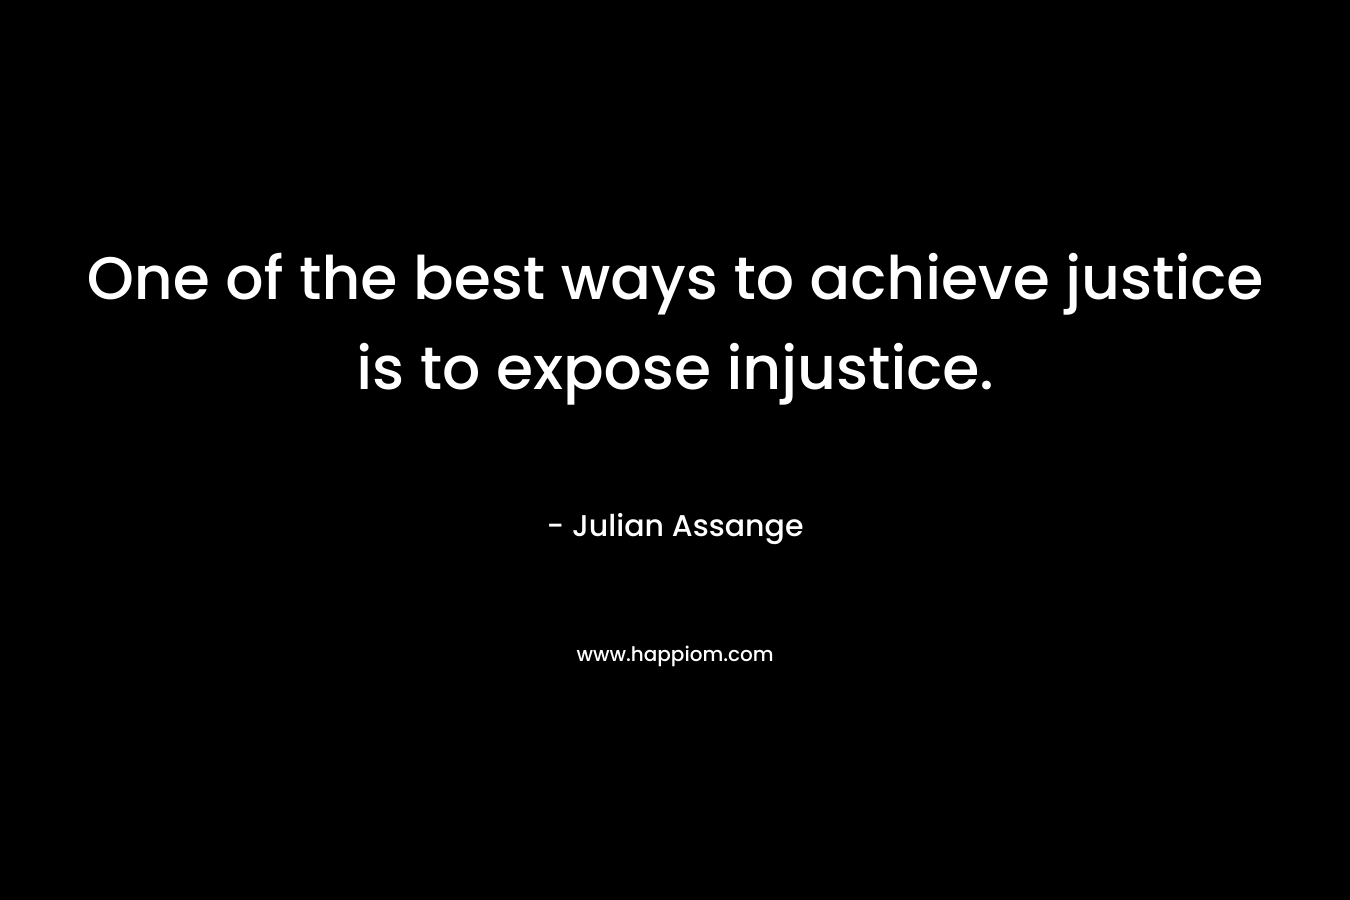 One of the best ways to achieve justice is to expose injustice.